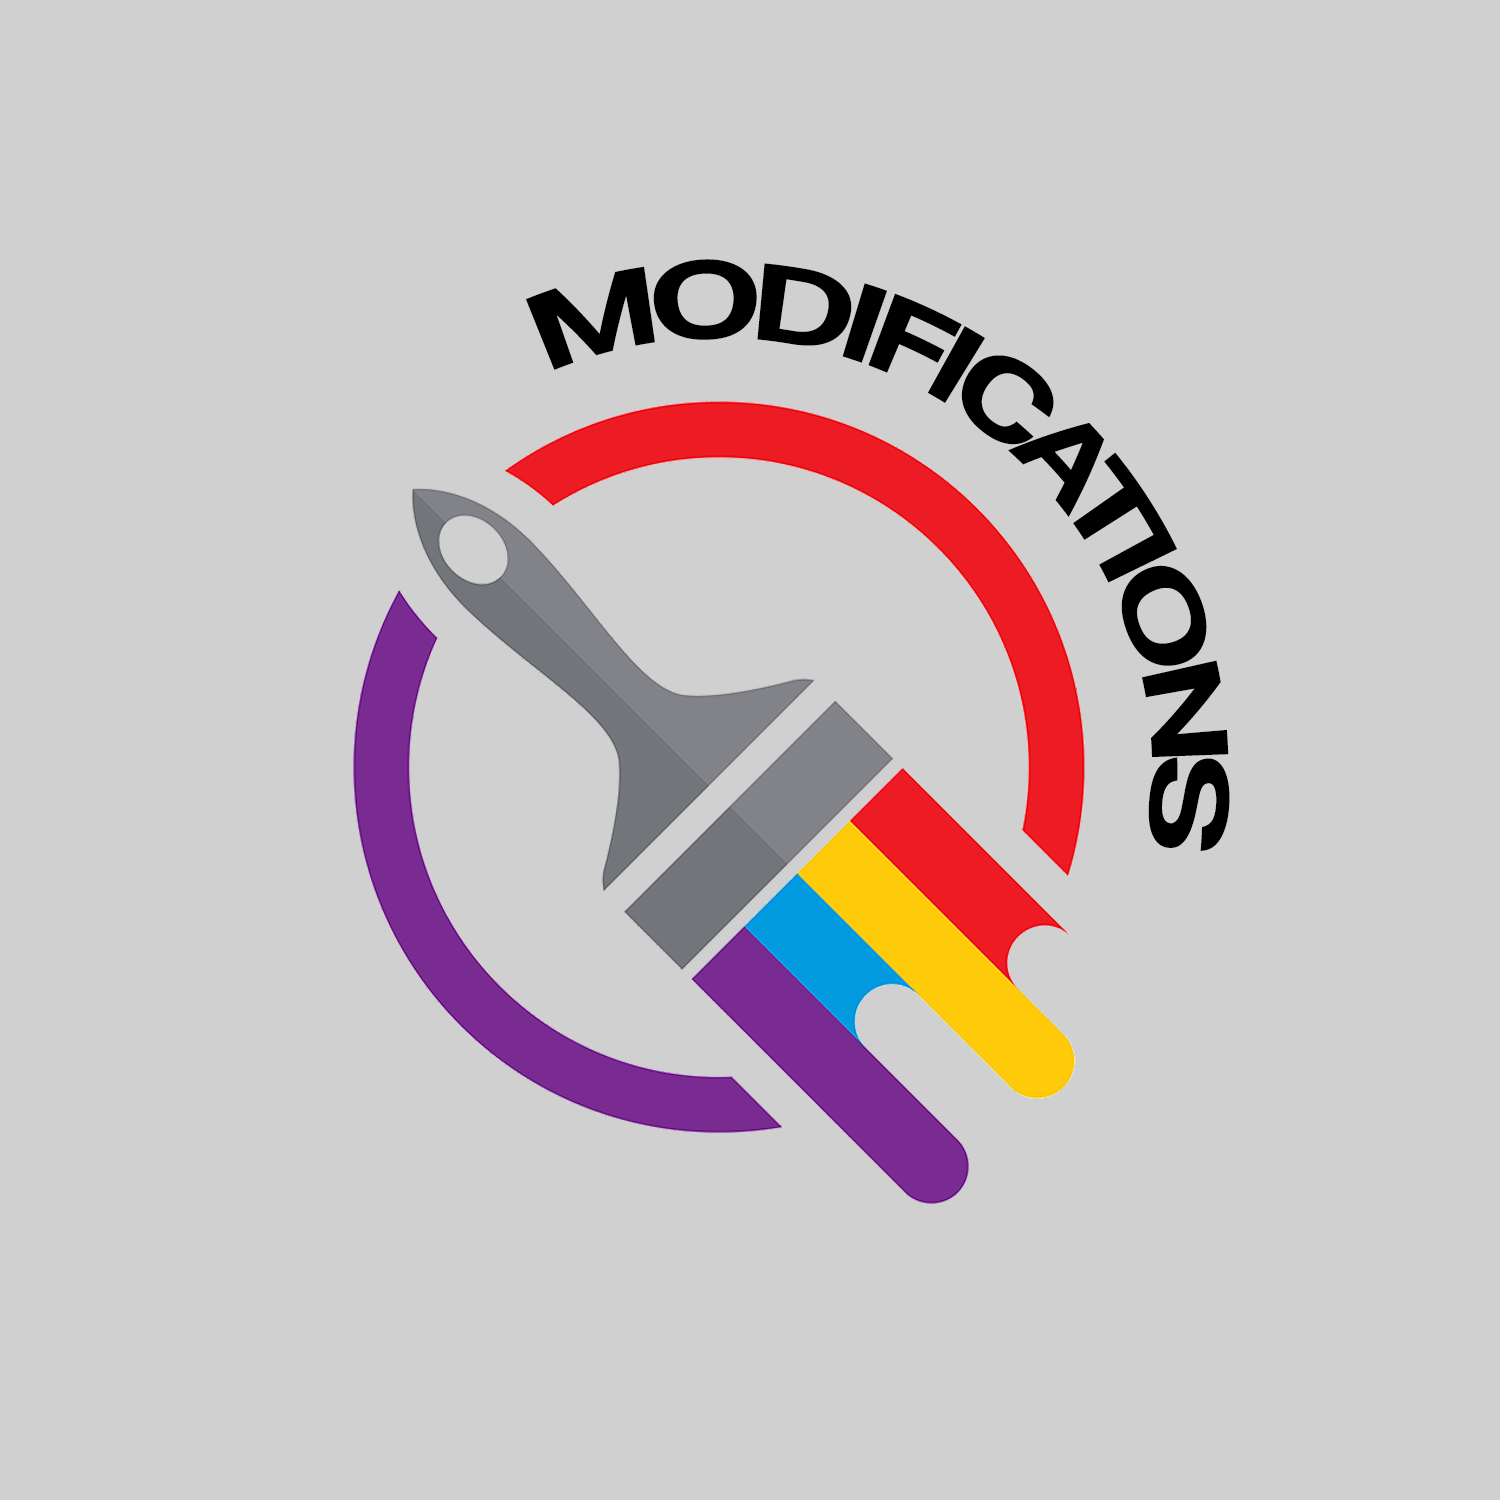 Modifications n°1 - Ollow